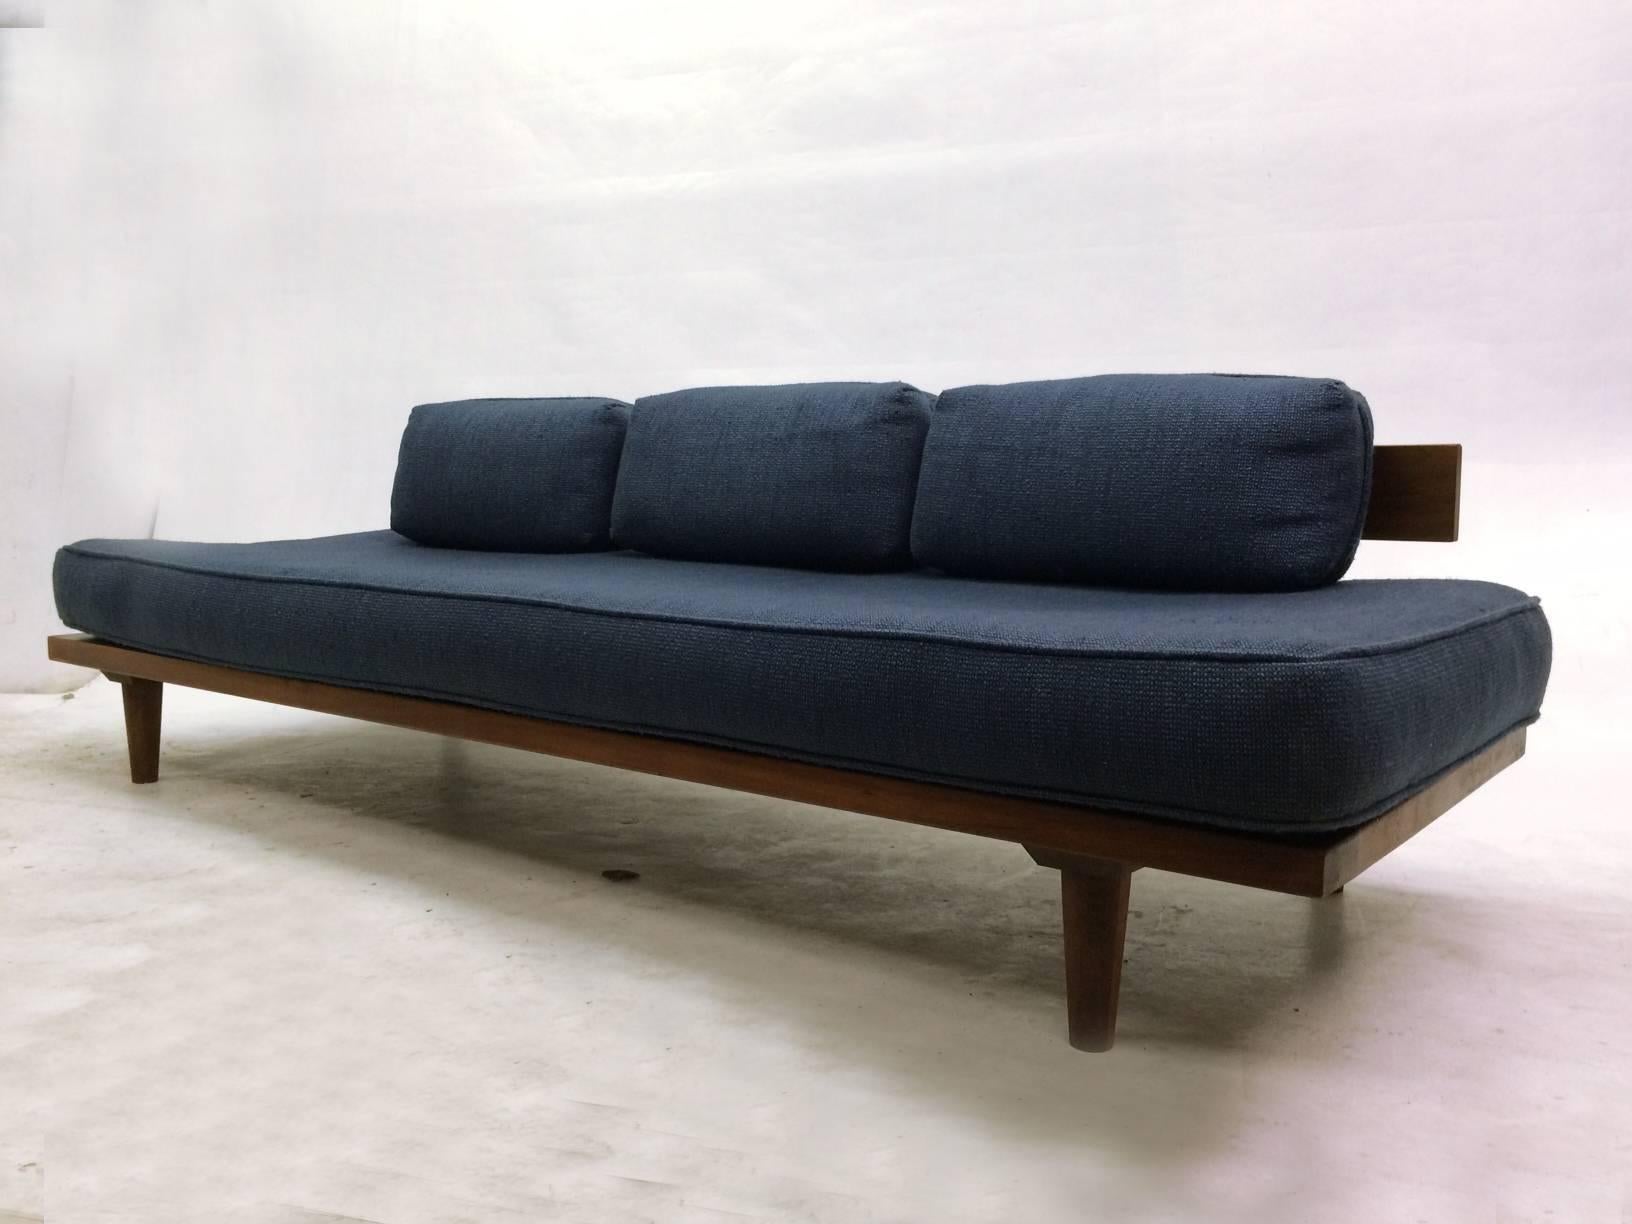 This Mid-Century daybed is constructed with a solid teak frame and round turned legs. The teak backrest is supported by welded steel brackets. The cushions are finished in a navy woven fabric.
It is very comfortable.